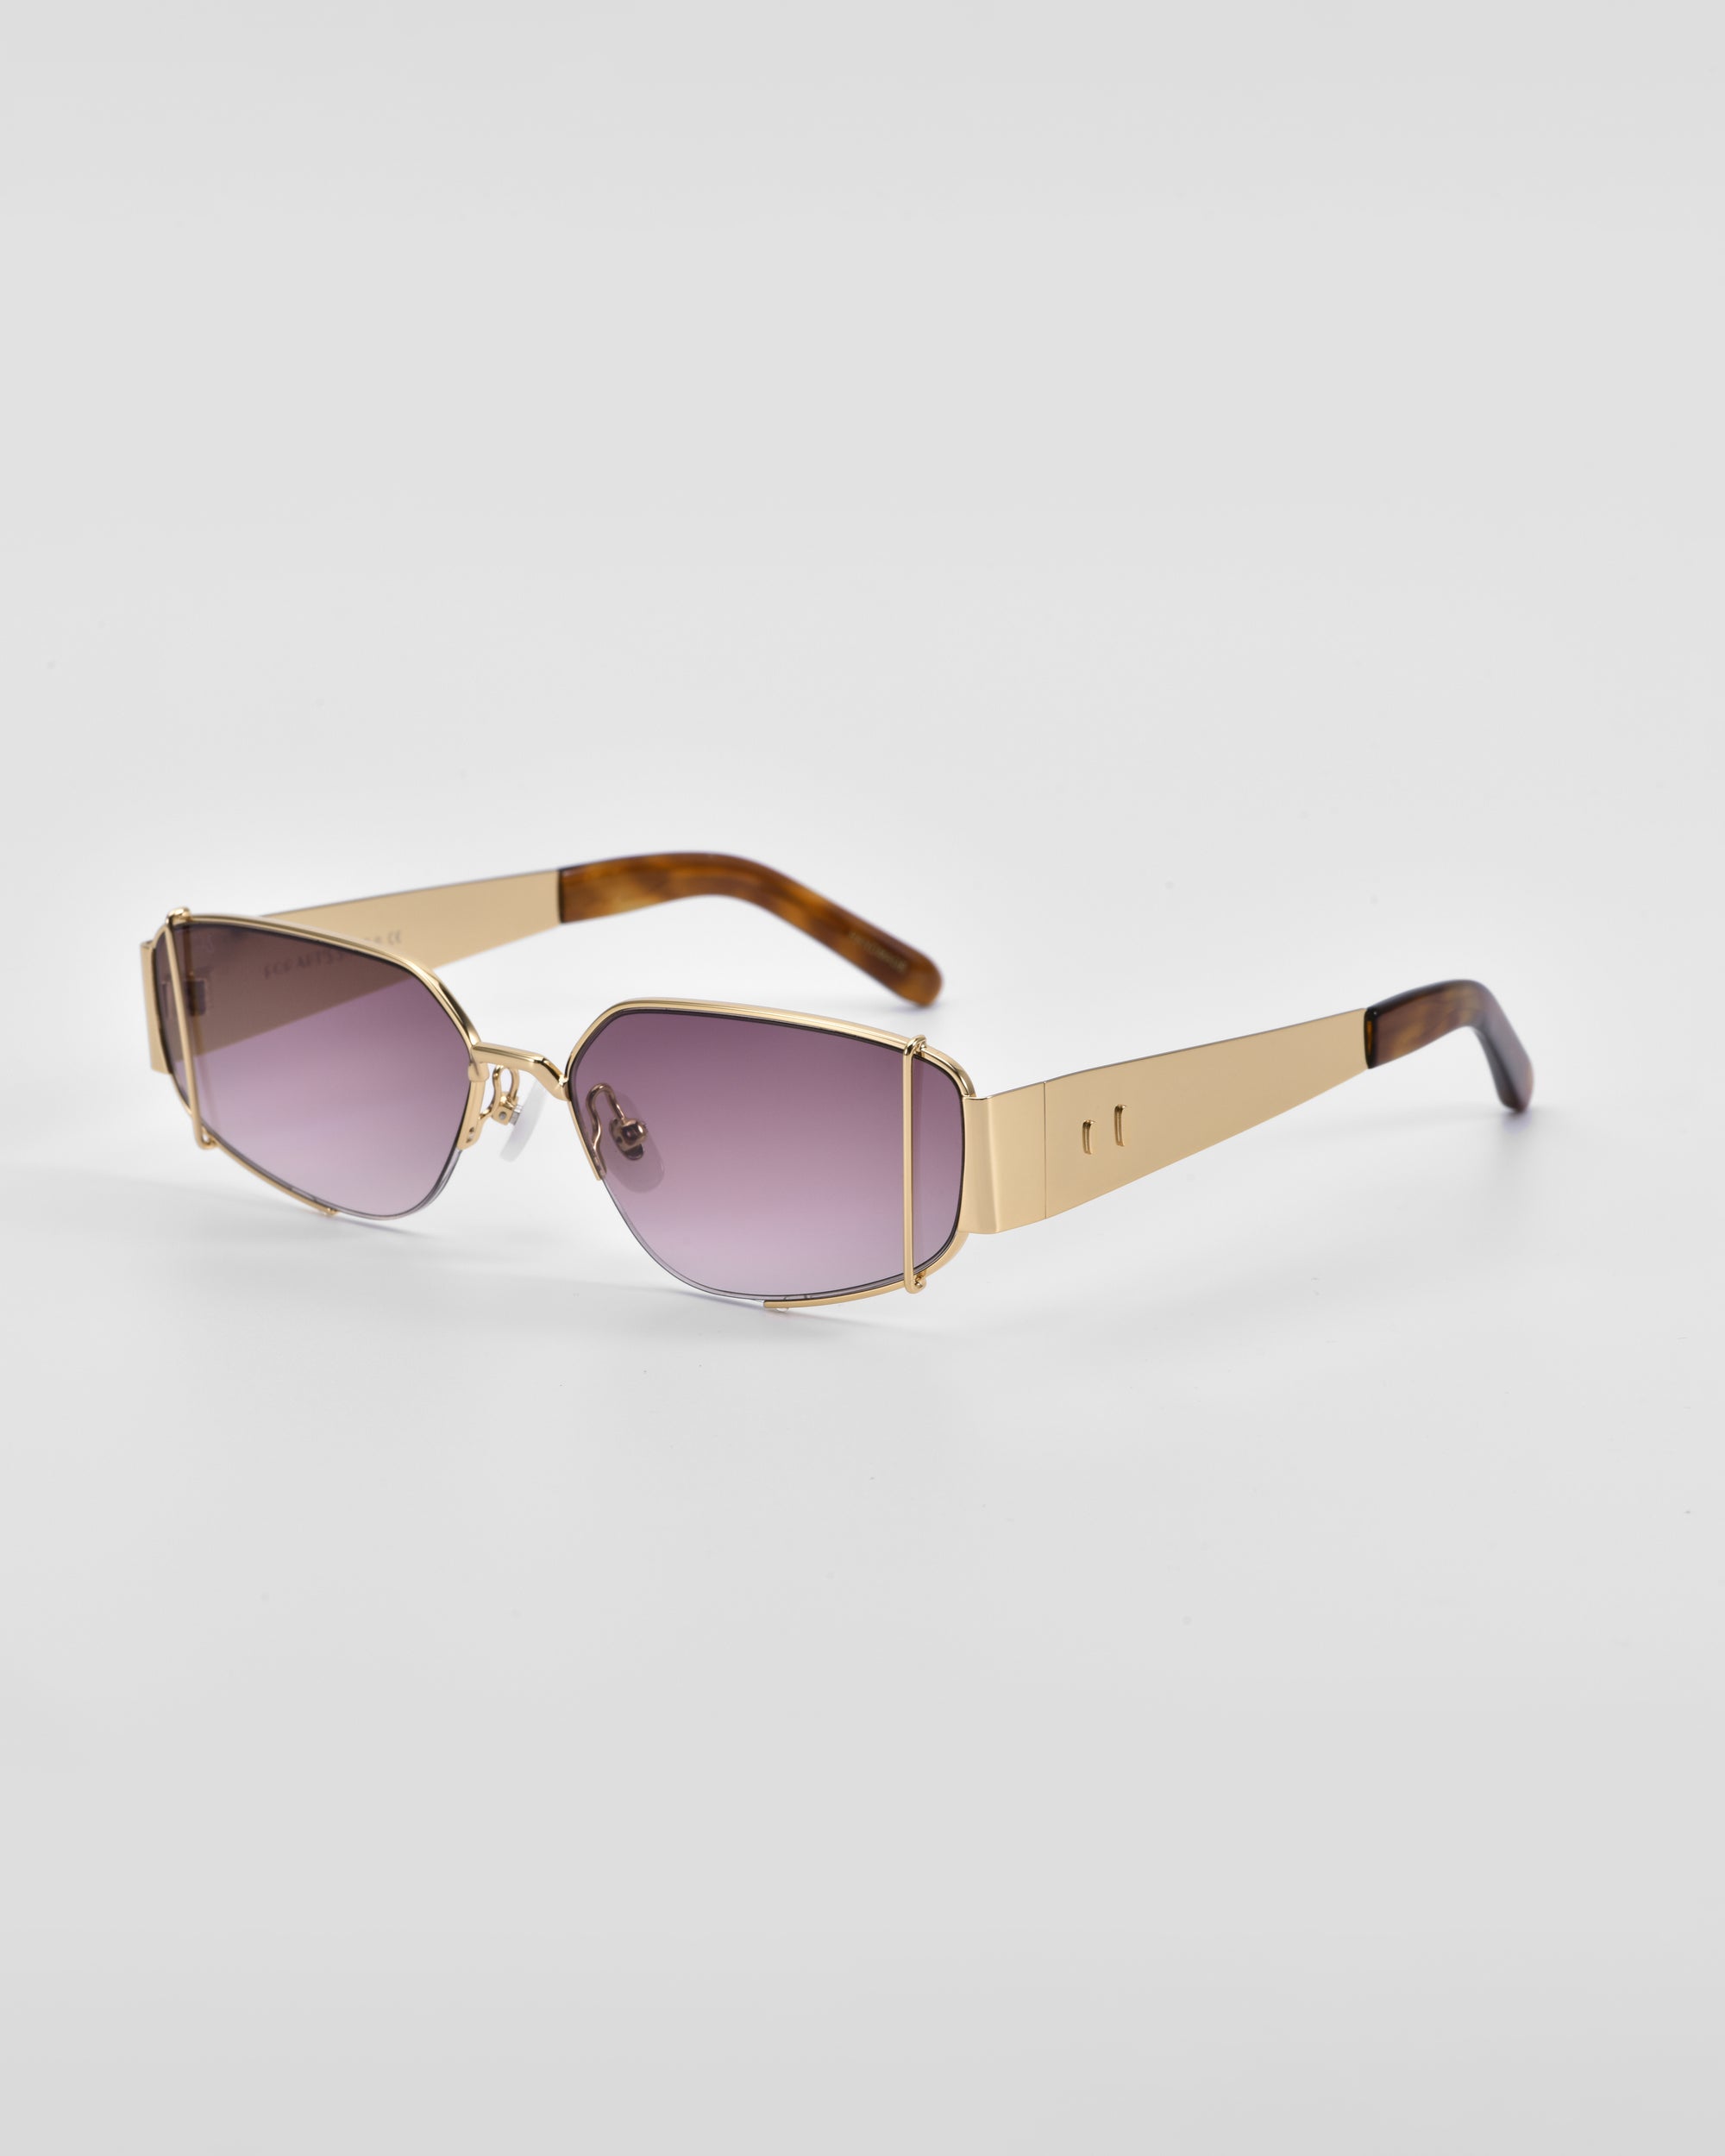 A pair of For Art&#39;s Sake® Talia designer sunglasses with 18-karat gold metallic frames and gradient purple-tinted lenses. The arms of the sunglasses are gold with tortoiseshell patterning near the ends. The sunglasses are set against a plain white background.